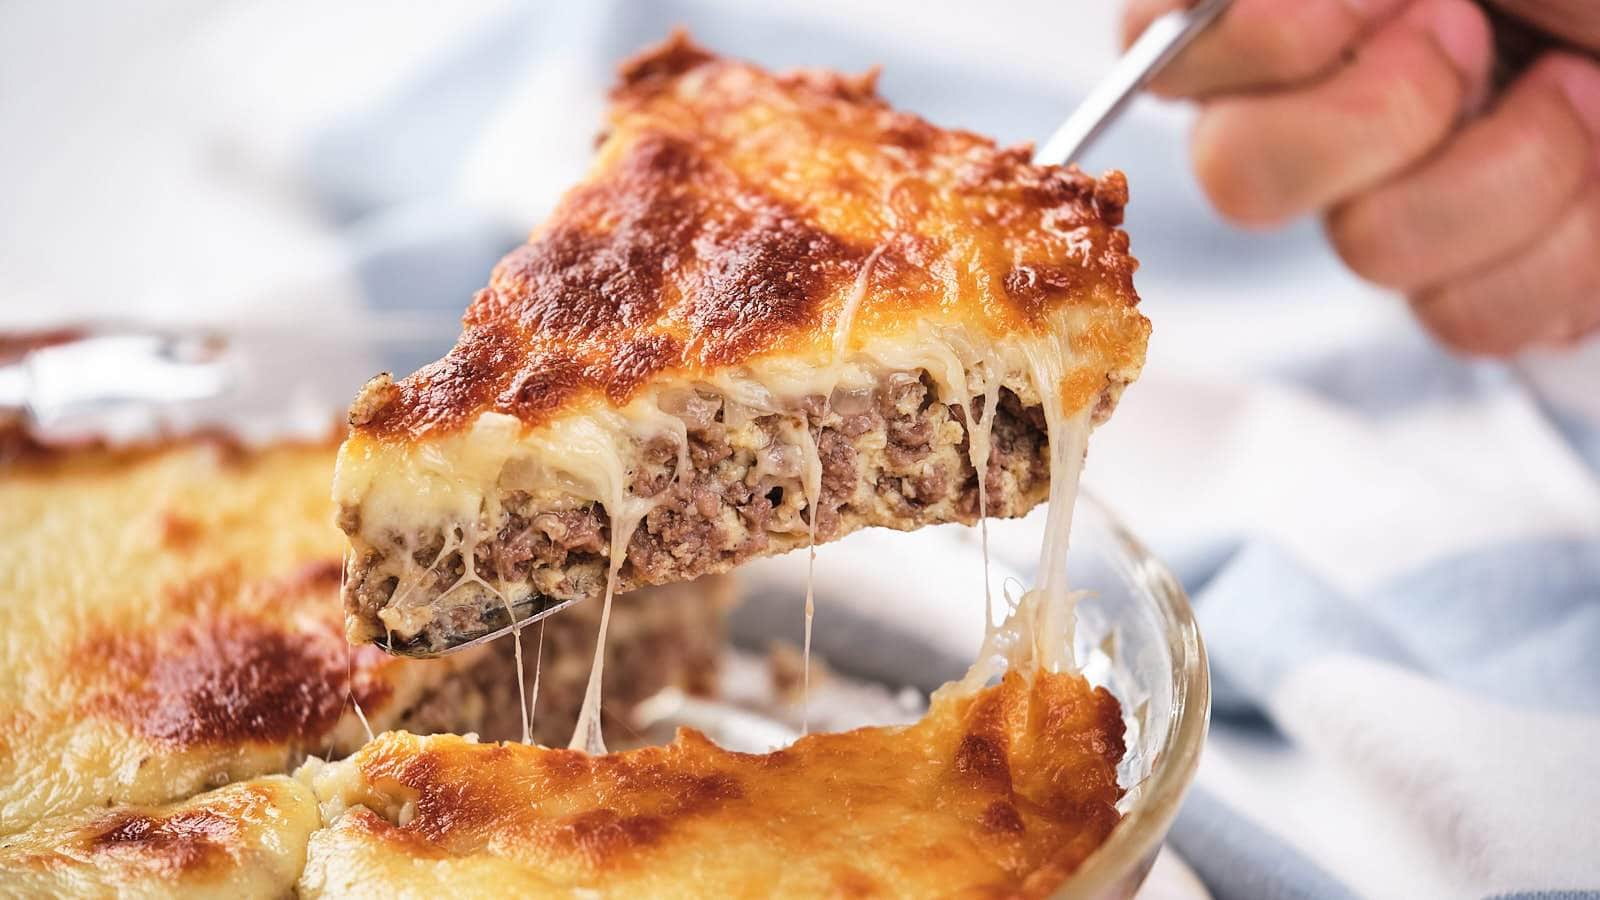 A slice of lasagna being lifted, showing layers of meat and melted cheese.